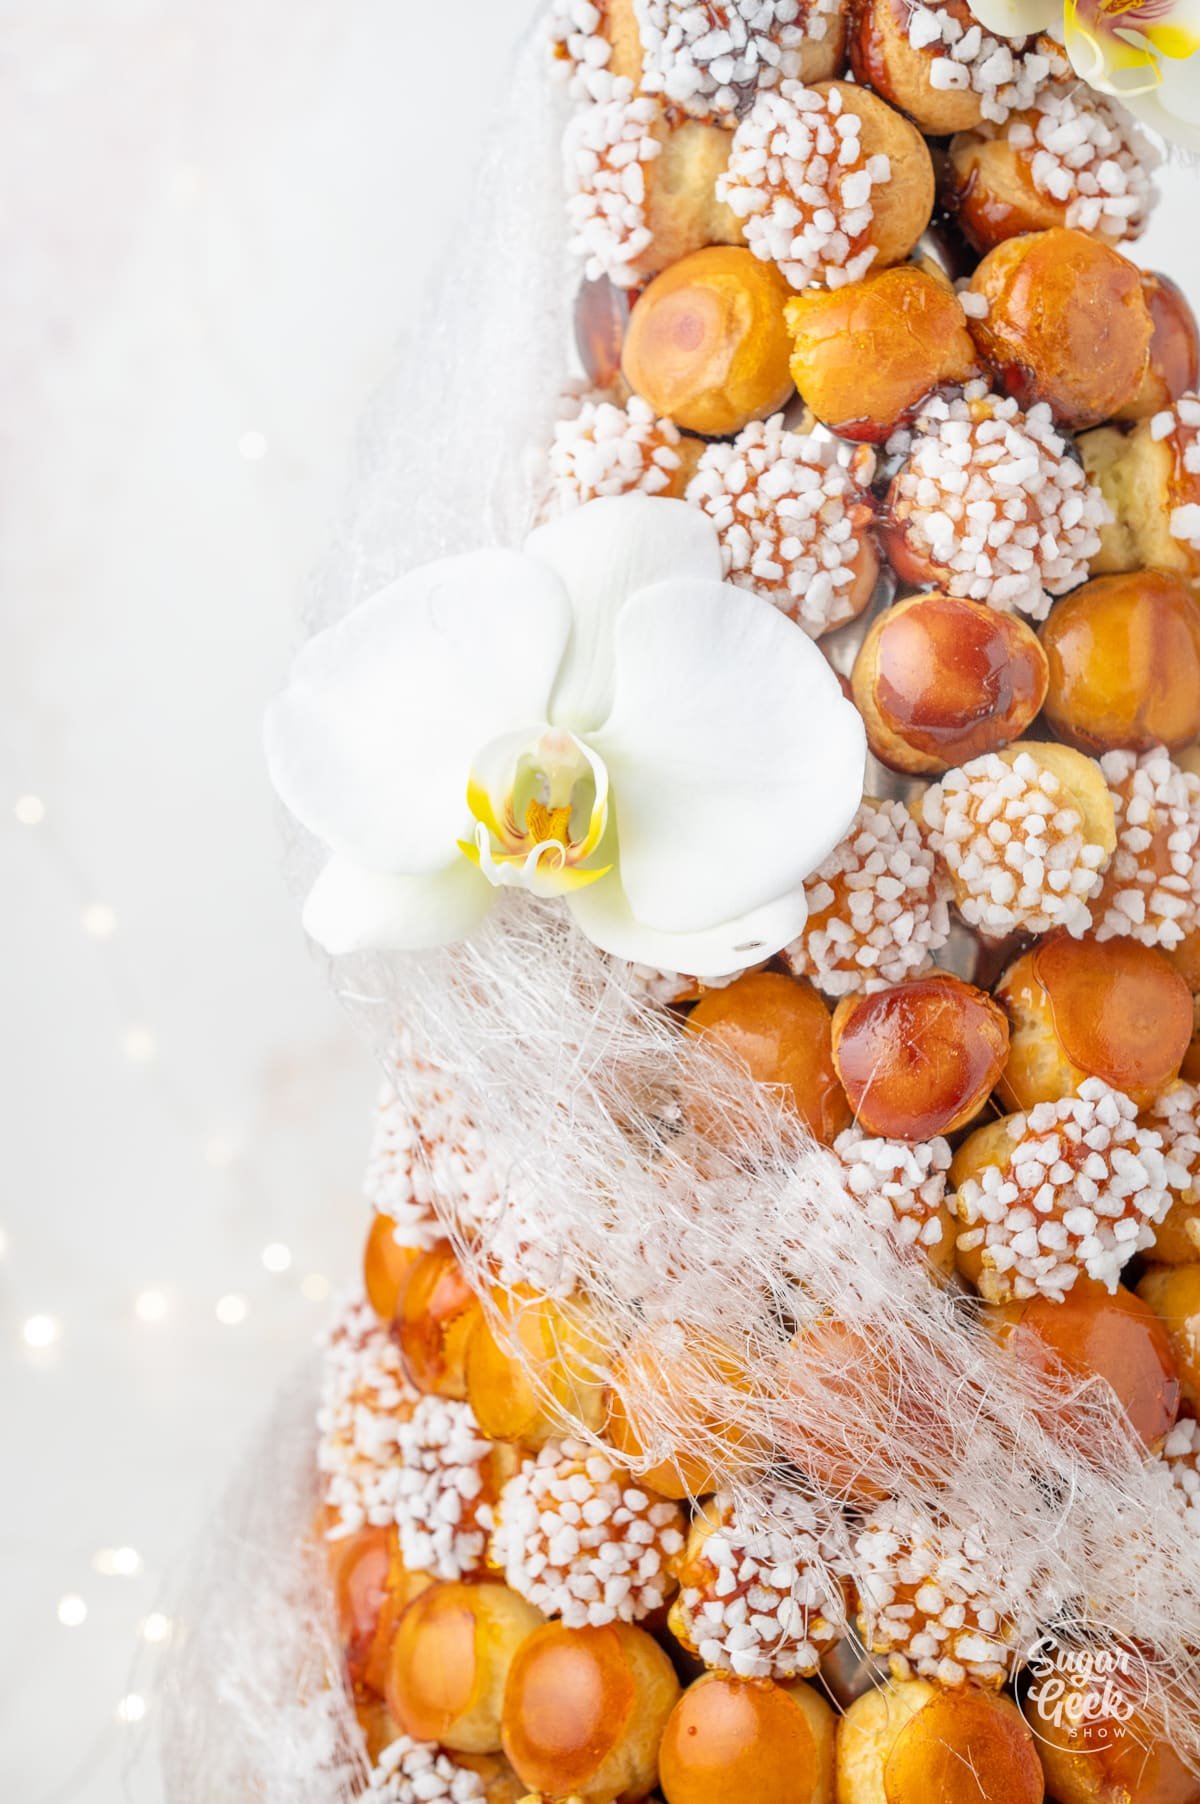 patterned croquembouche with spun sugar and a white orchid on the side